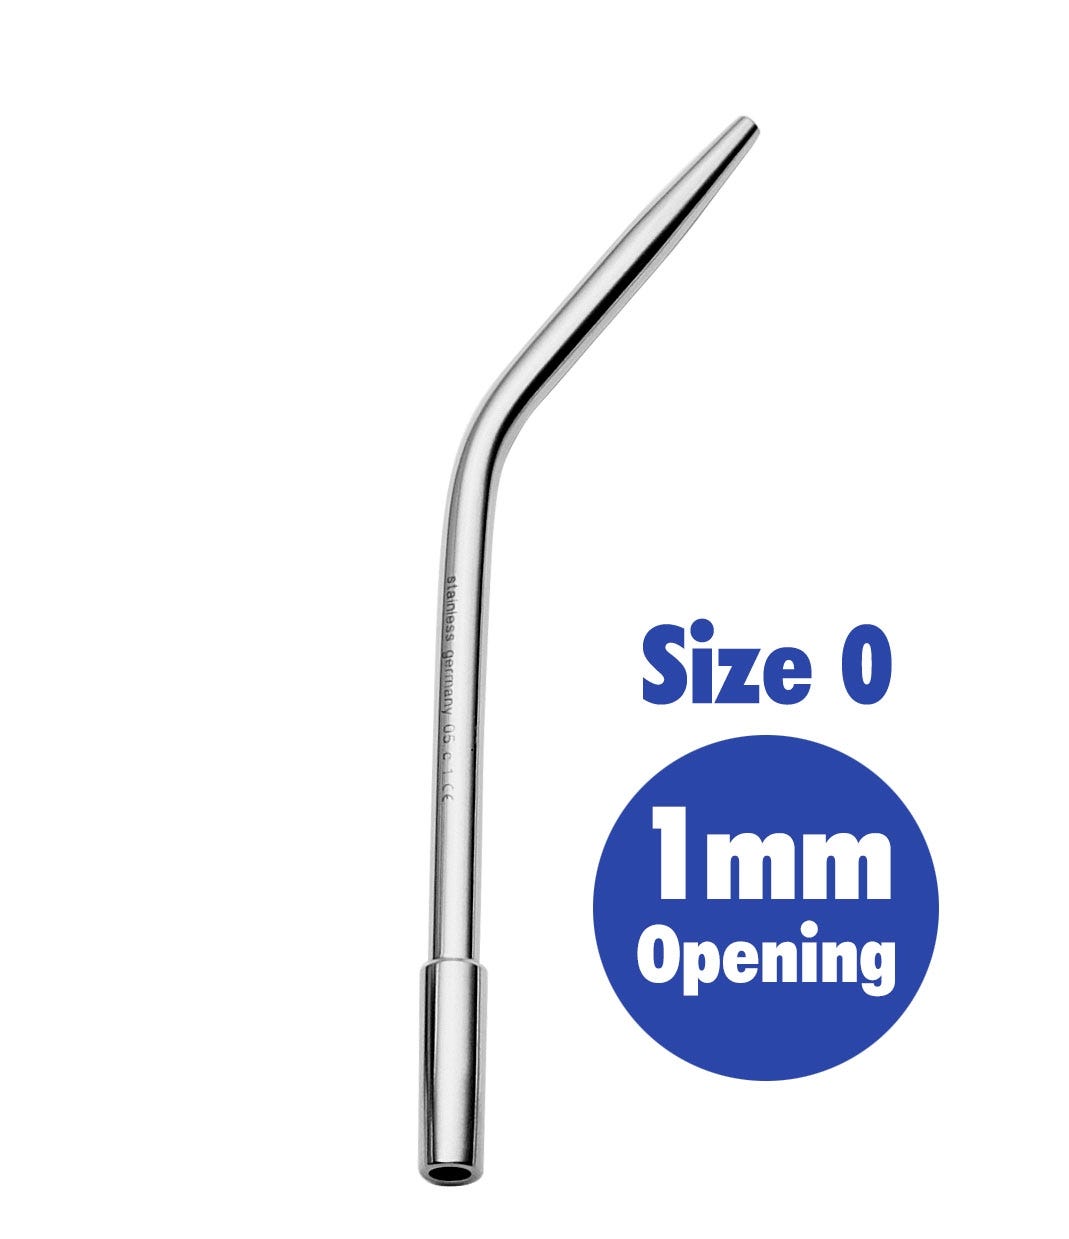 ACE Oral Surgery Suction Tip, size 0, 1mm opening